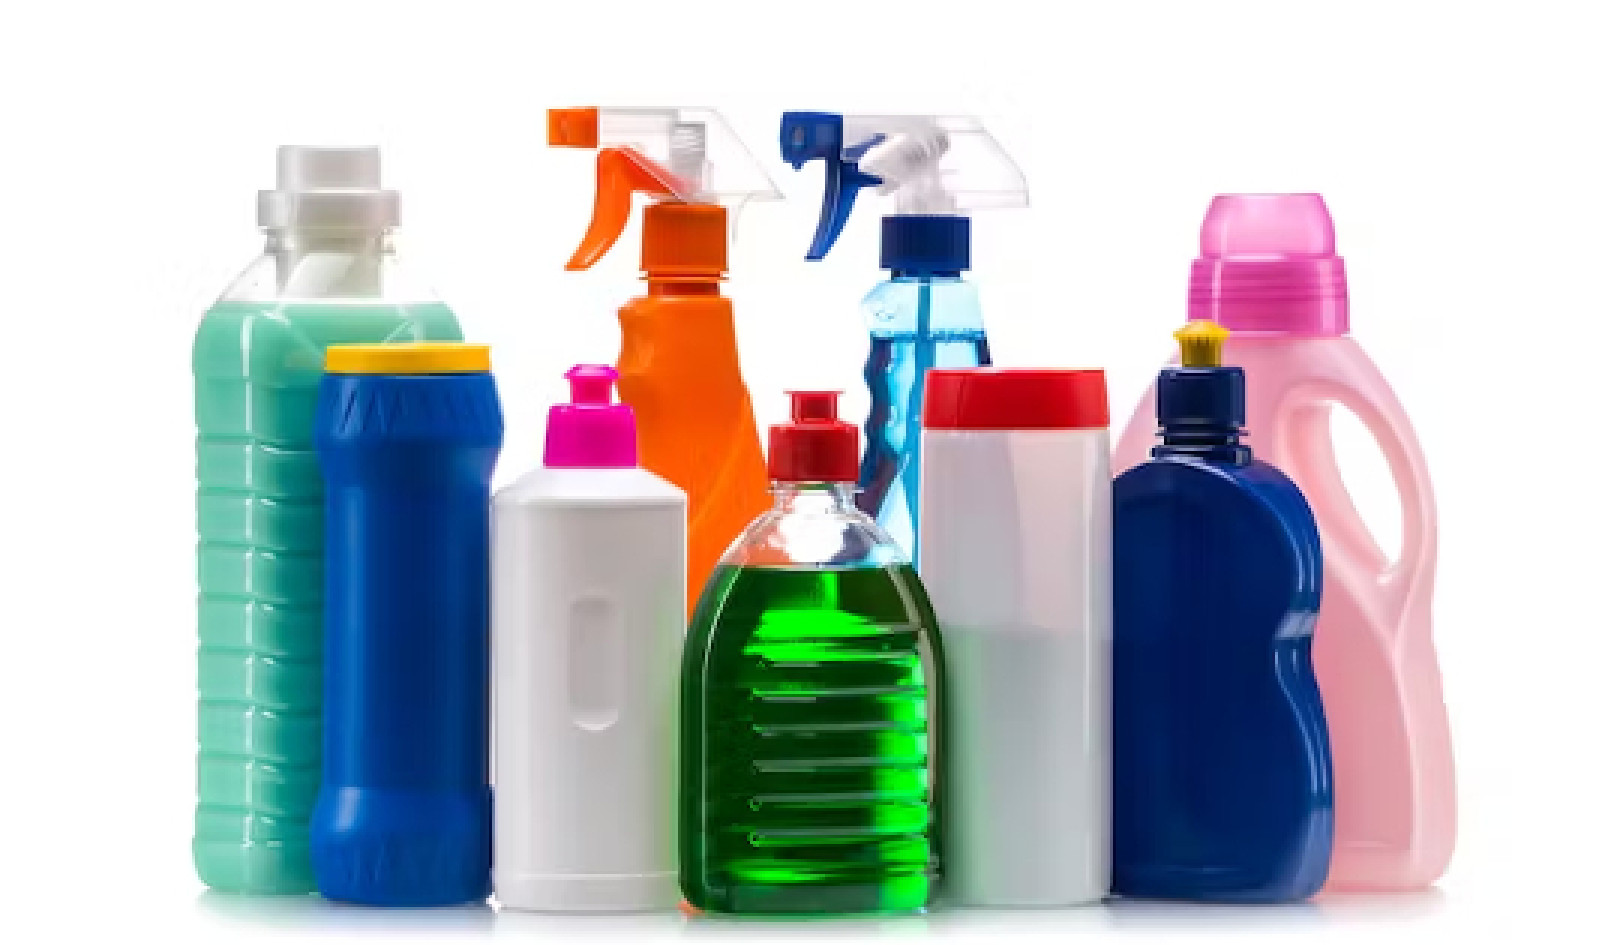 Body Lotions, Mothballs, Cleaning Fluids and Other Widely Used Products Contain Toxic Chemicals